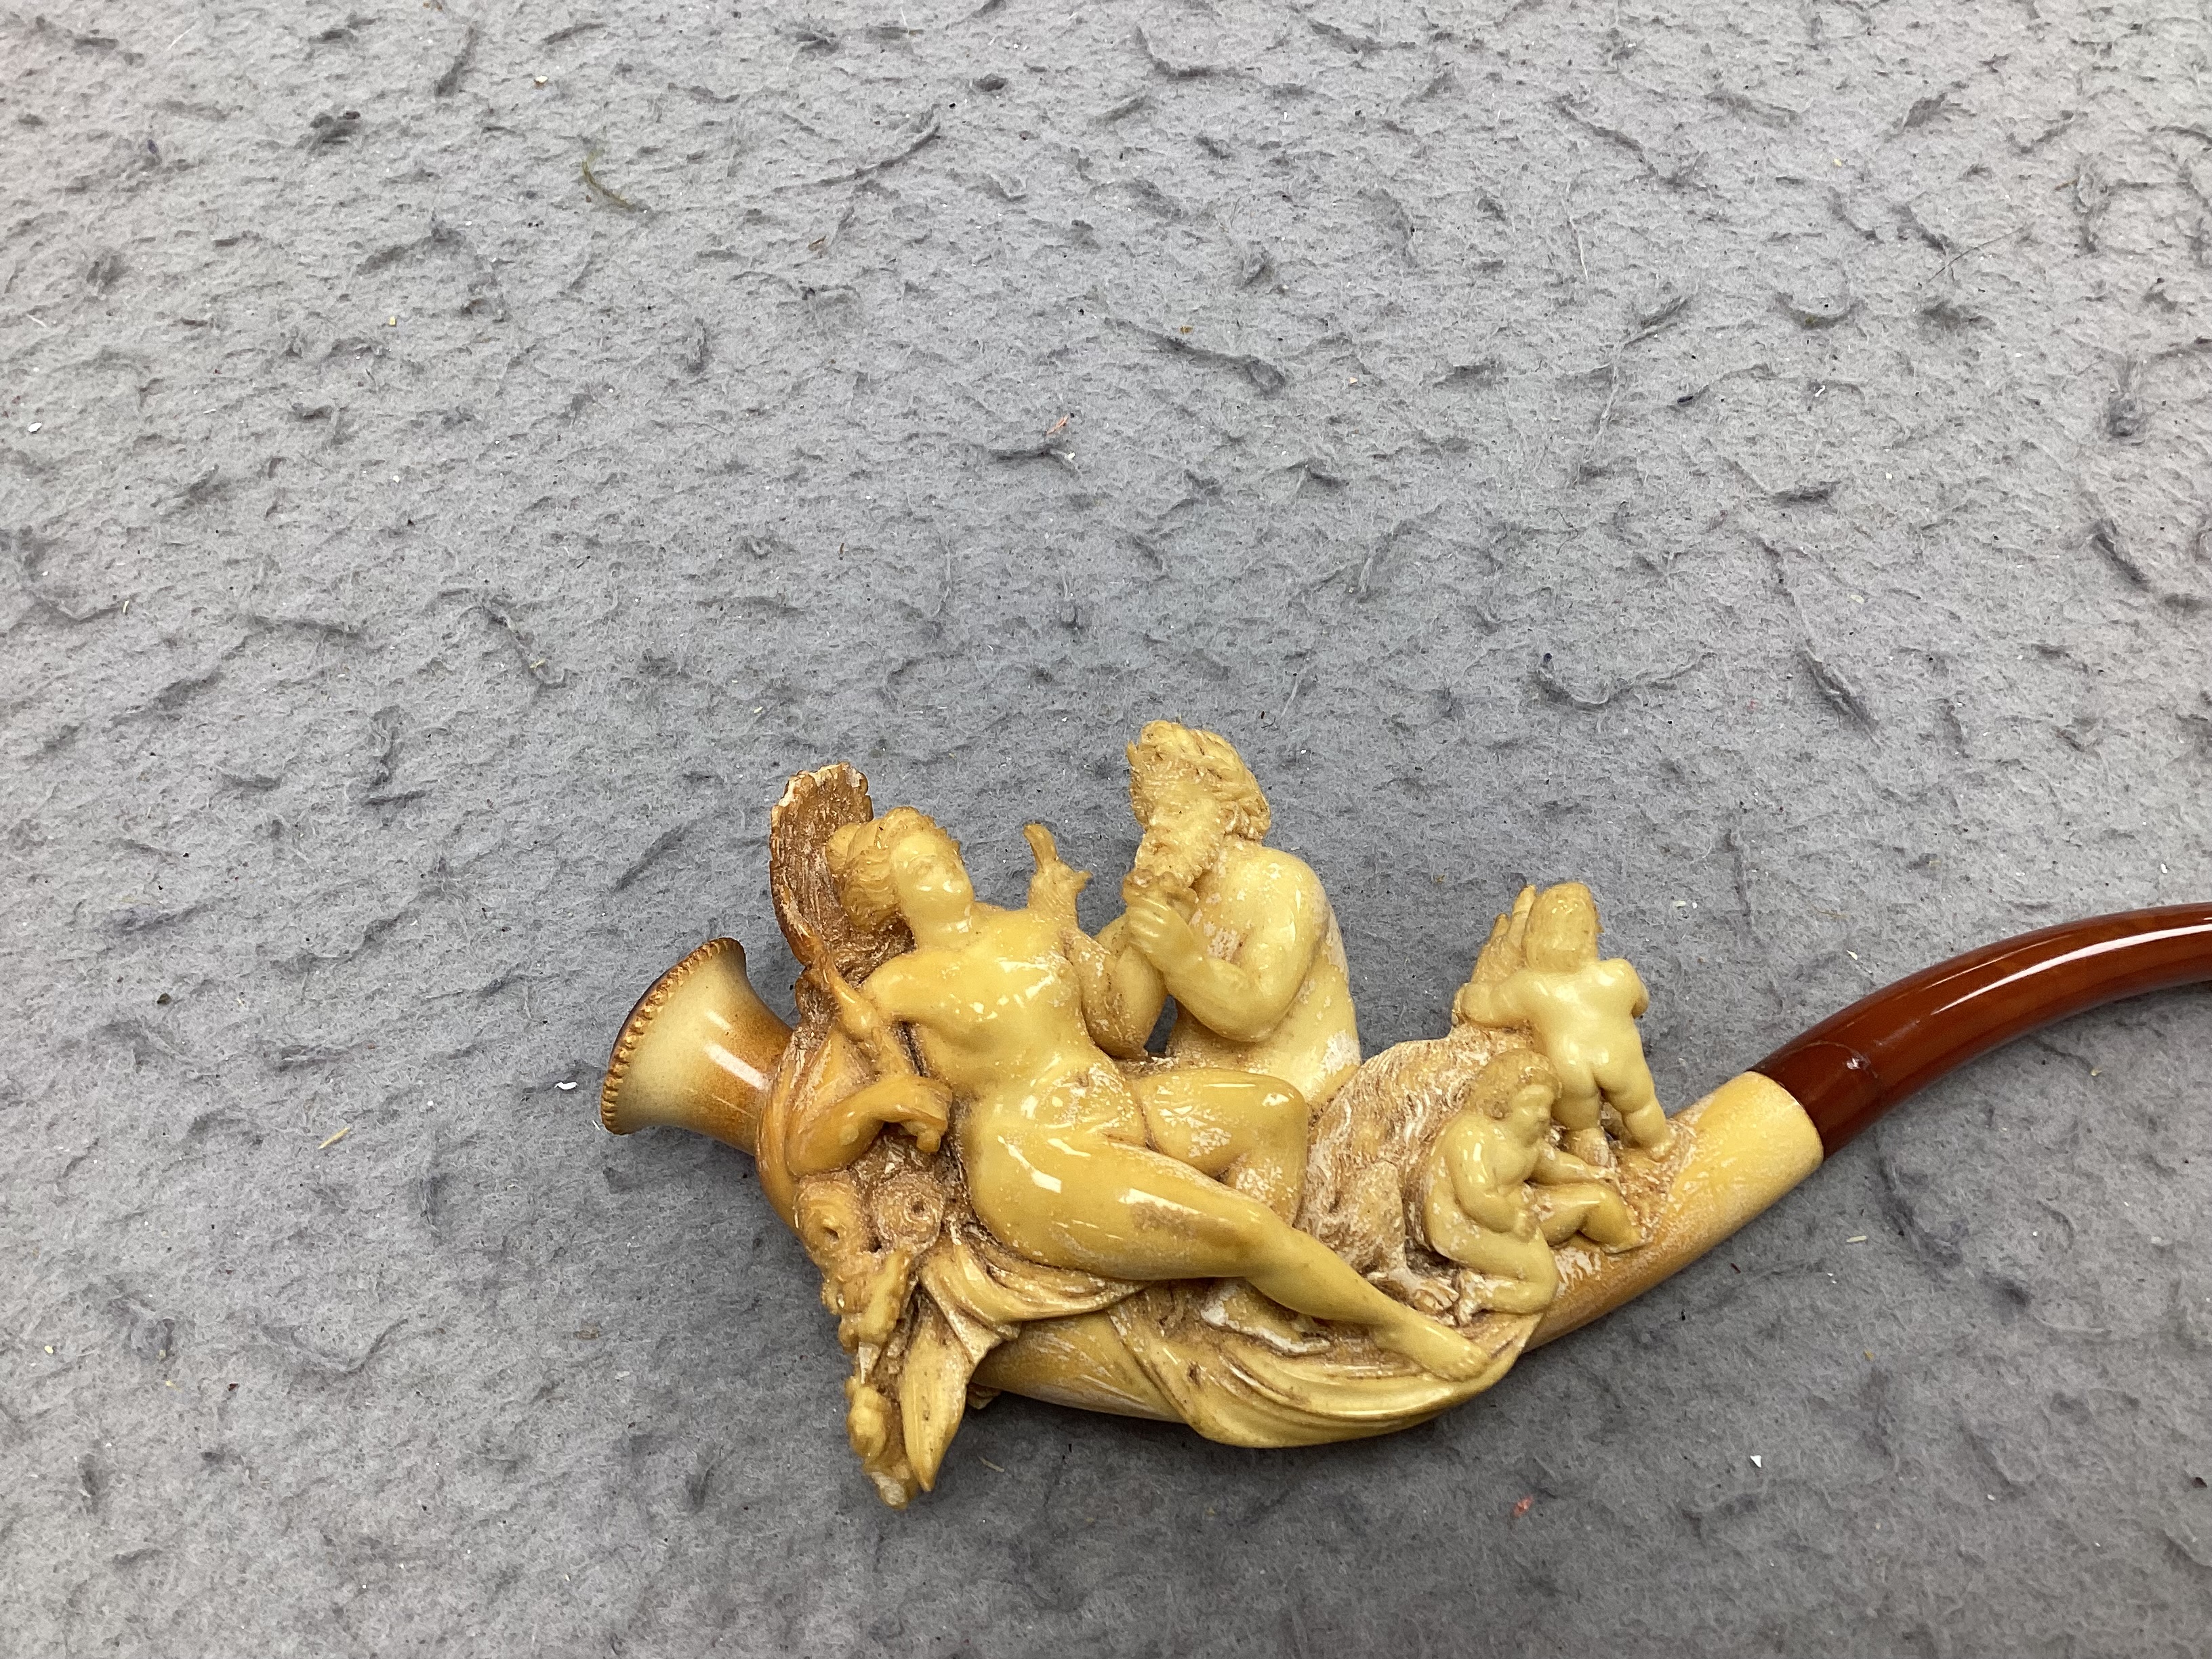 A cased ornate Meerschaum pipe, early 20th century, intricately carved with the figures of Mars and Rhea Silvia with Romulus and Remus and the wolf on the bowl, 18cm long